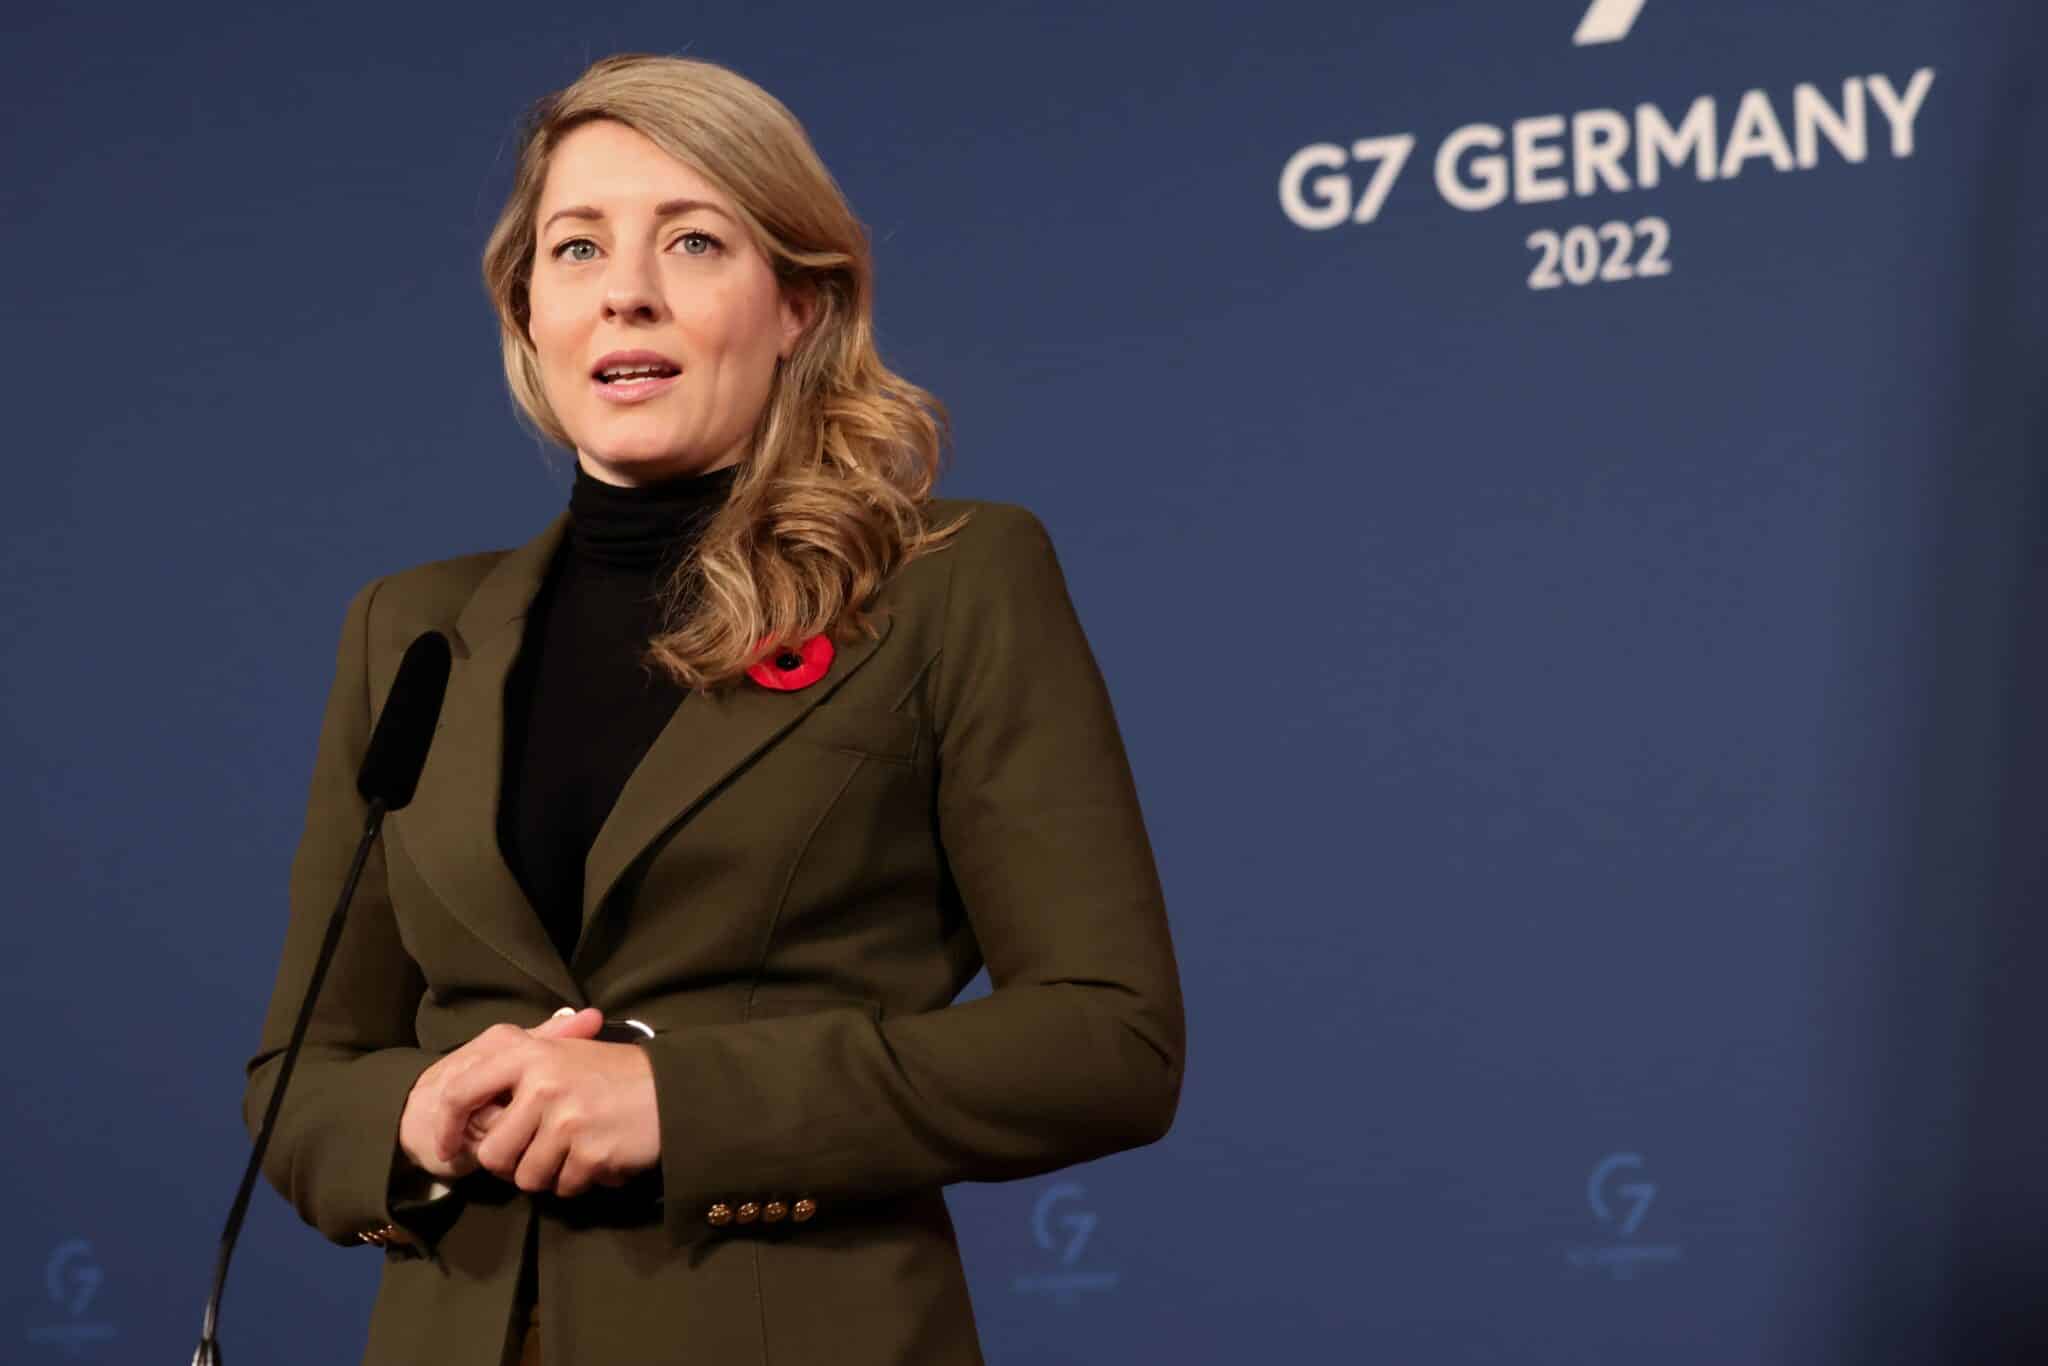 Melanie Joly speaks during the 67 infront of a navy blue backdrop, while wearing a dark green suit and a poppy.